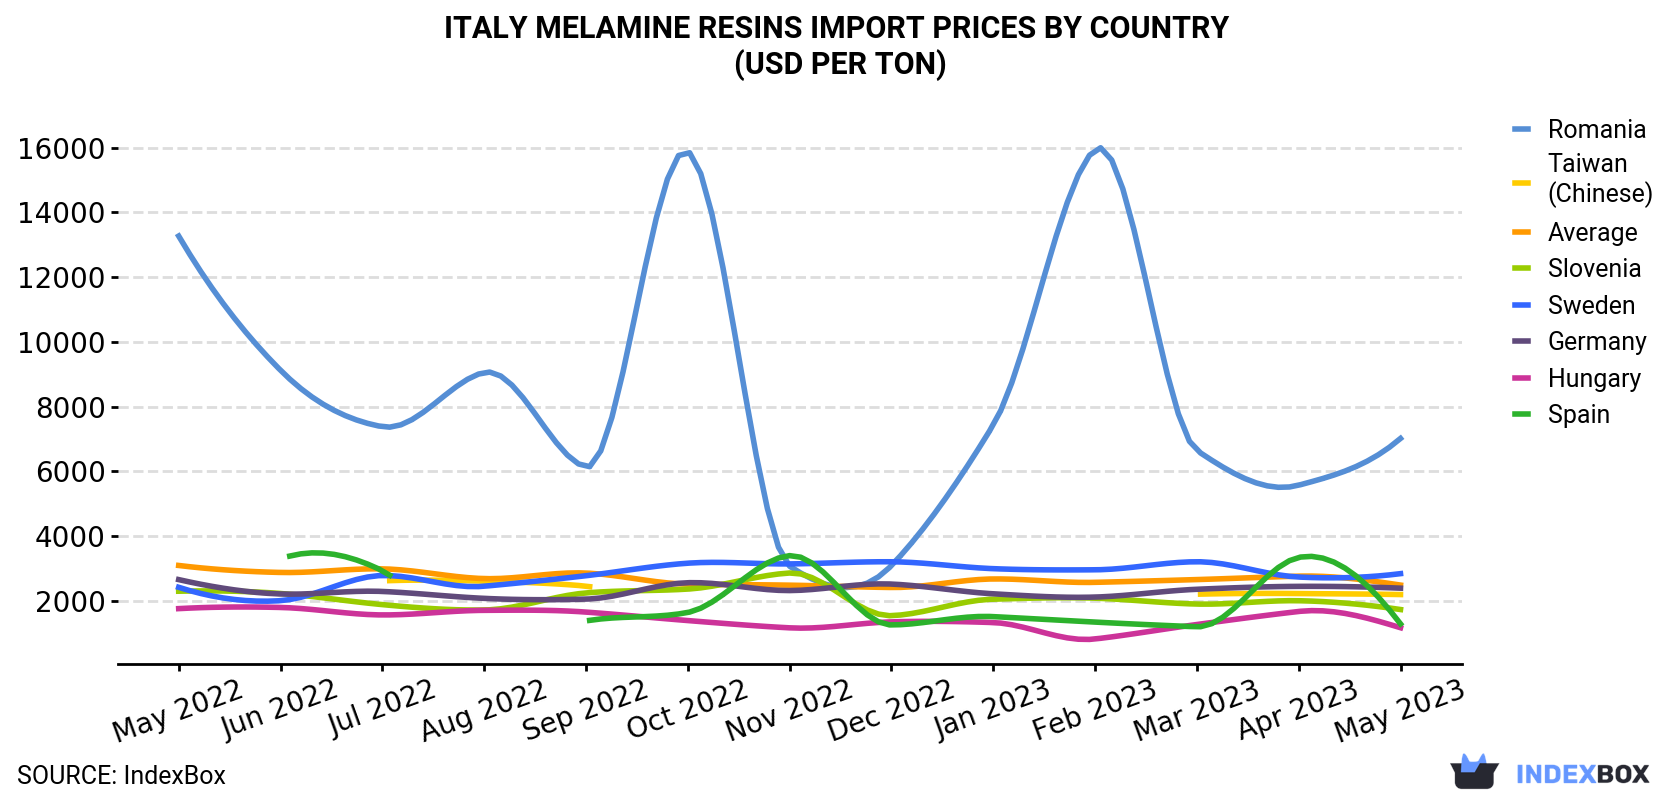 Italy Melamine Resins Import Prices By Country (USD Per Ton)